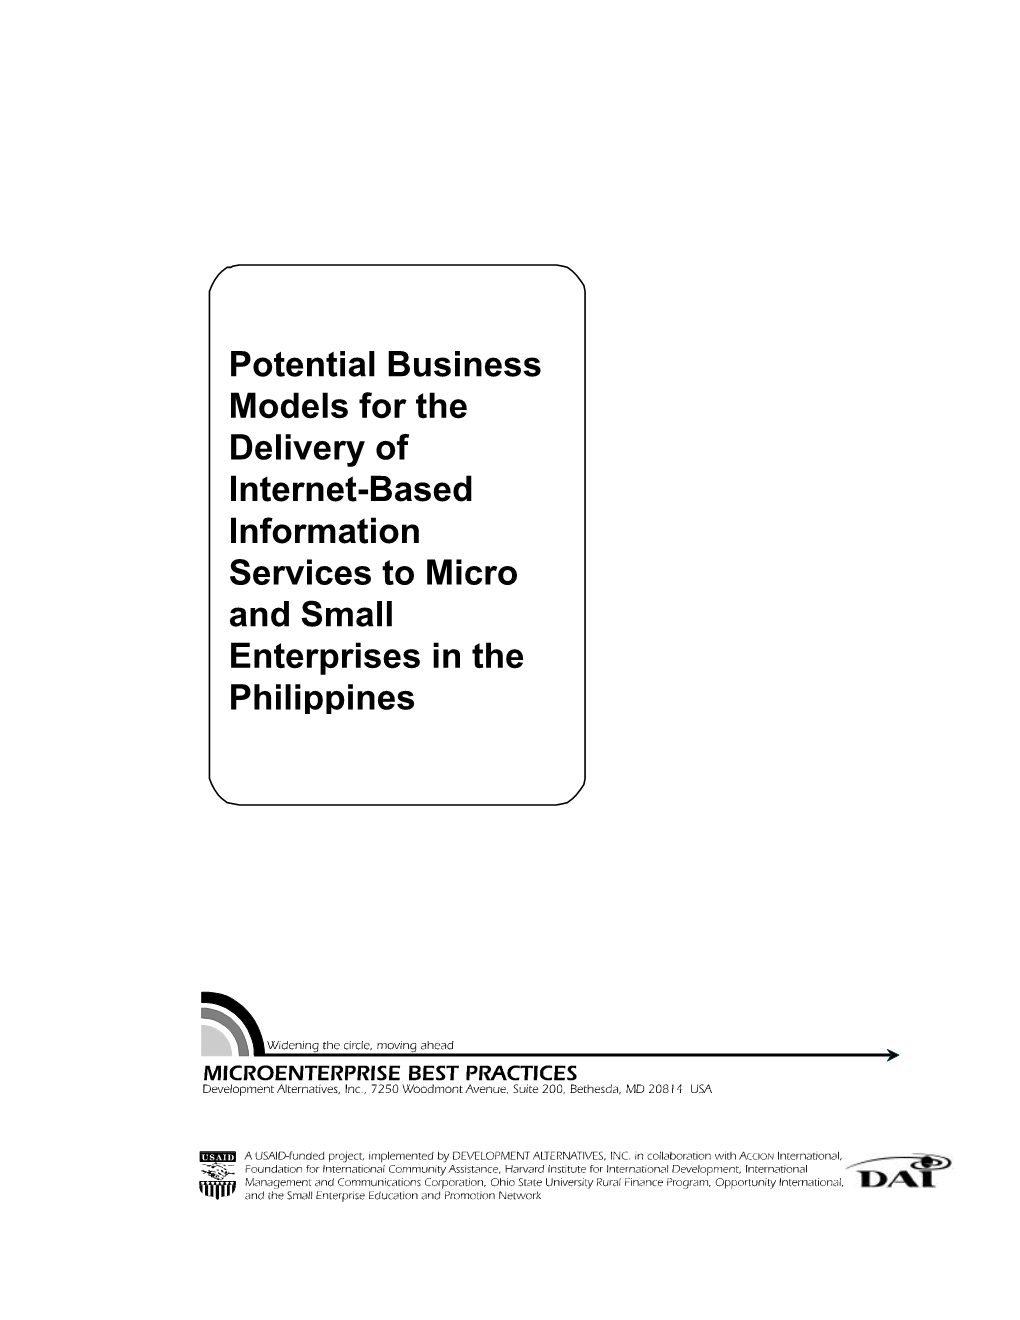 Potential Business Models for the Delivery of Internet-Based Information Services to Micro and Small Enterprises in the Philippi